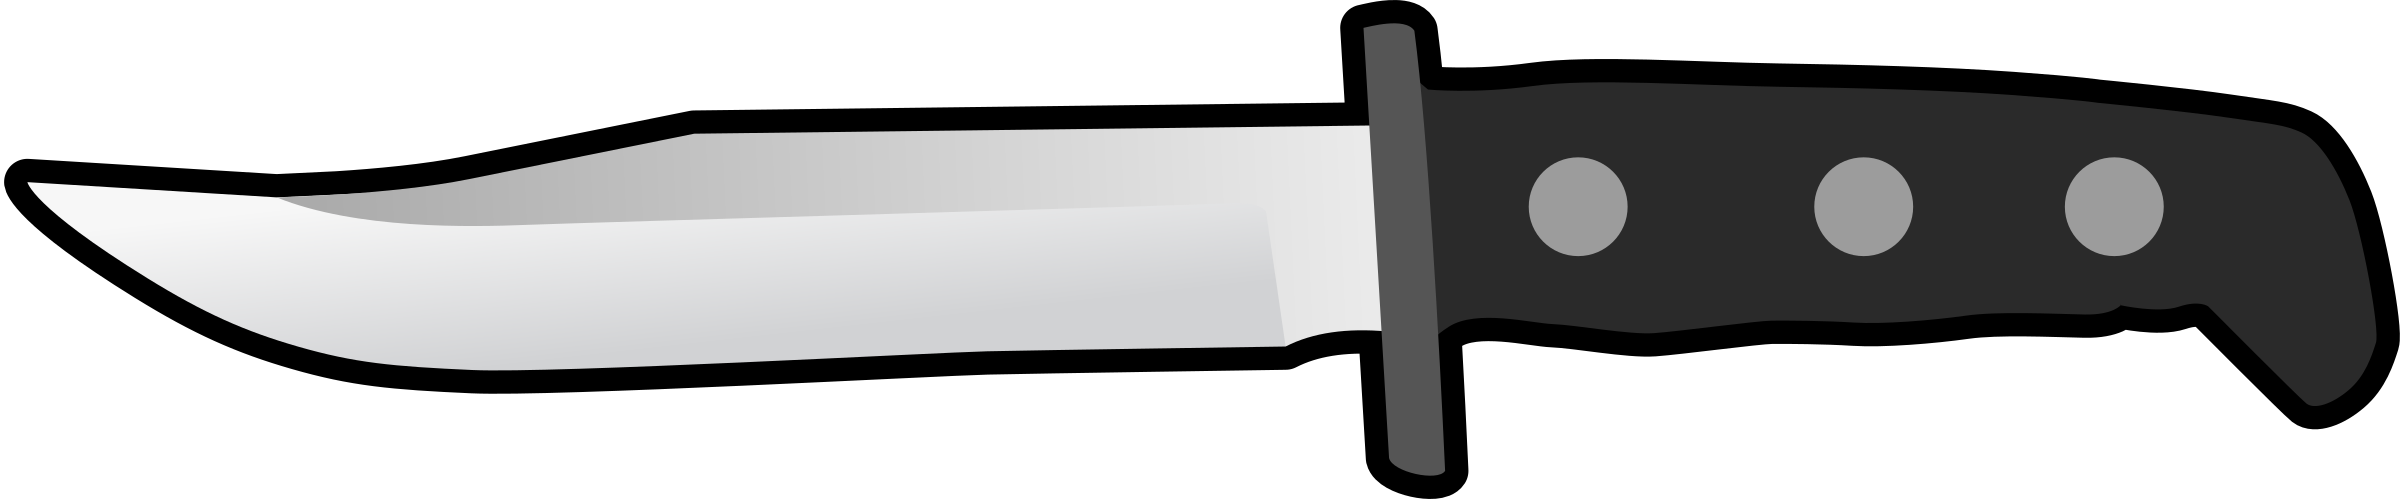 Simple Flat Knife Side View Clip arts